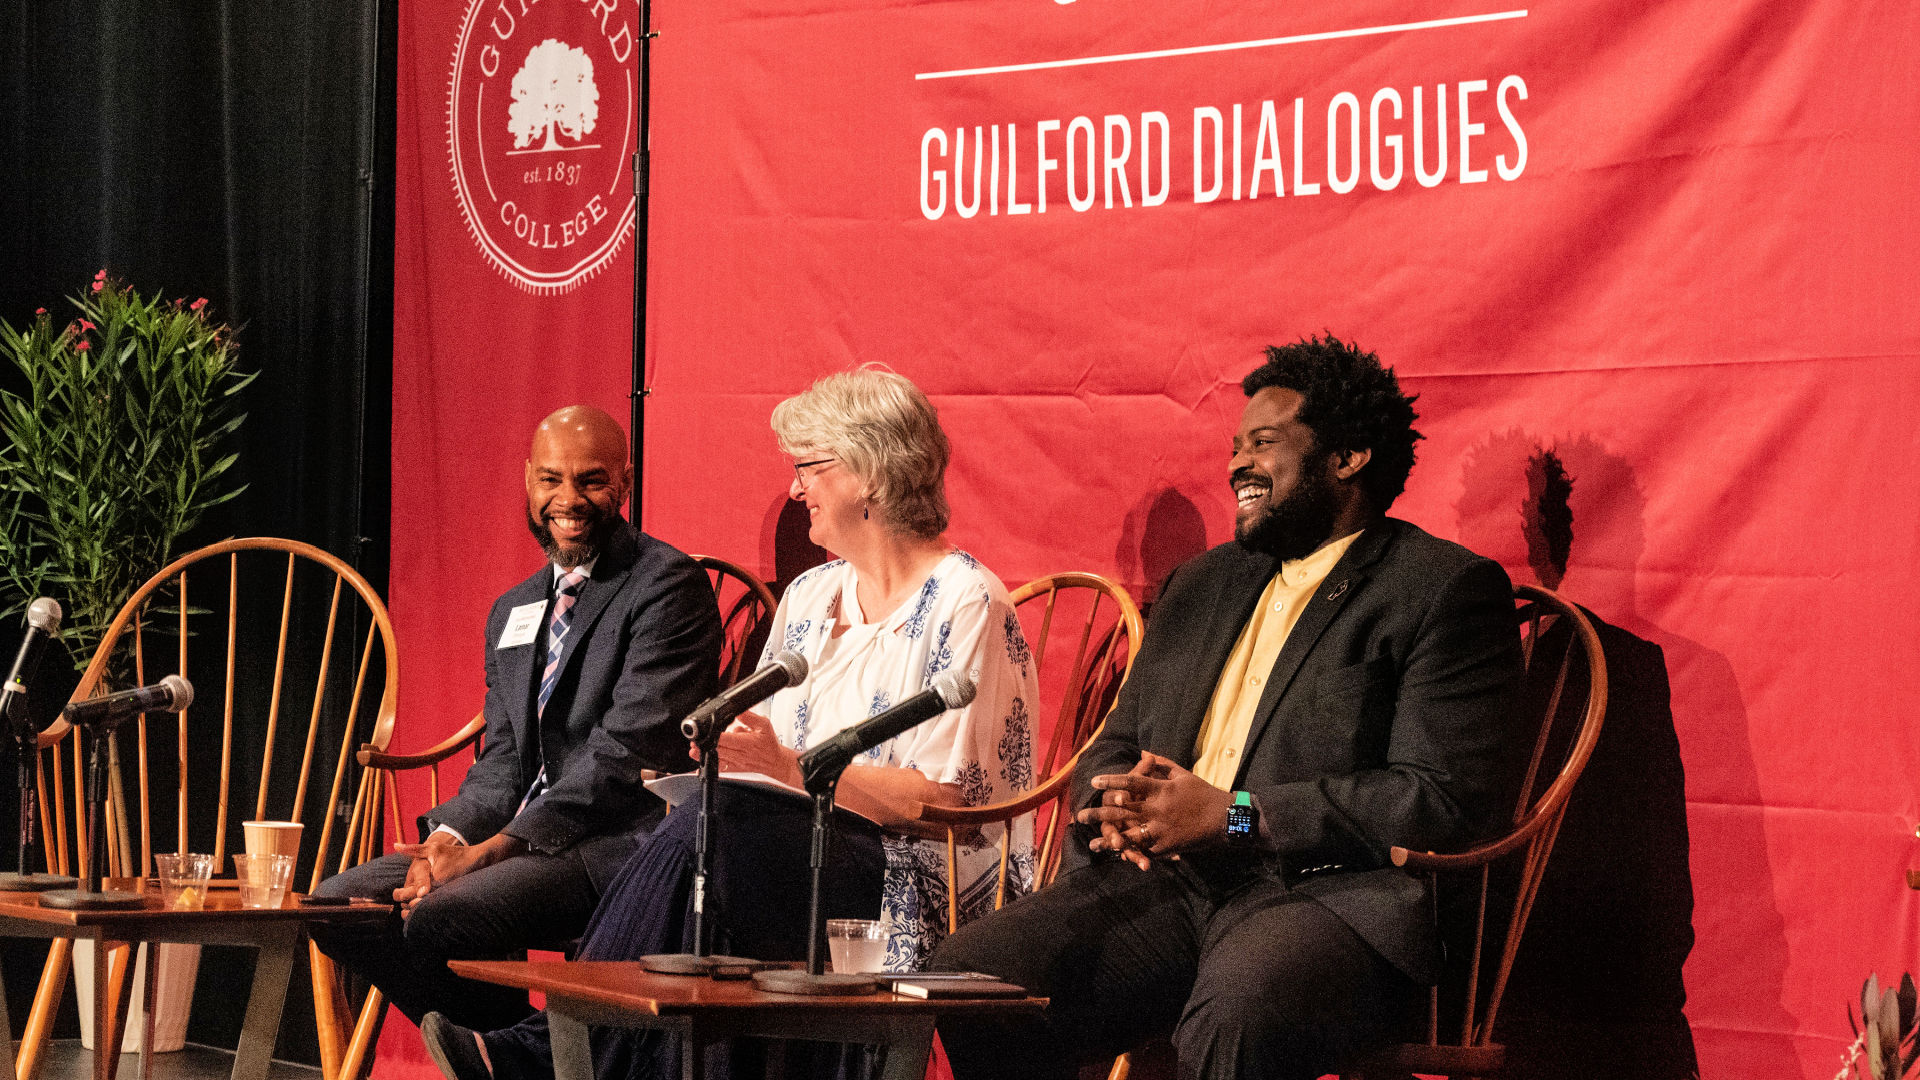 Seated on stage at the Guilford Dialogues are, from left: Lamar Thorpe, Sarah Glover, and Marcus Bass.